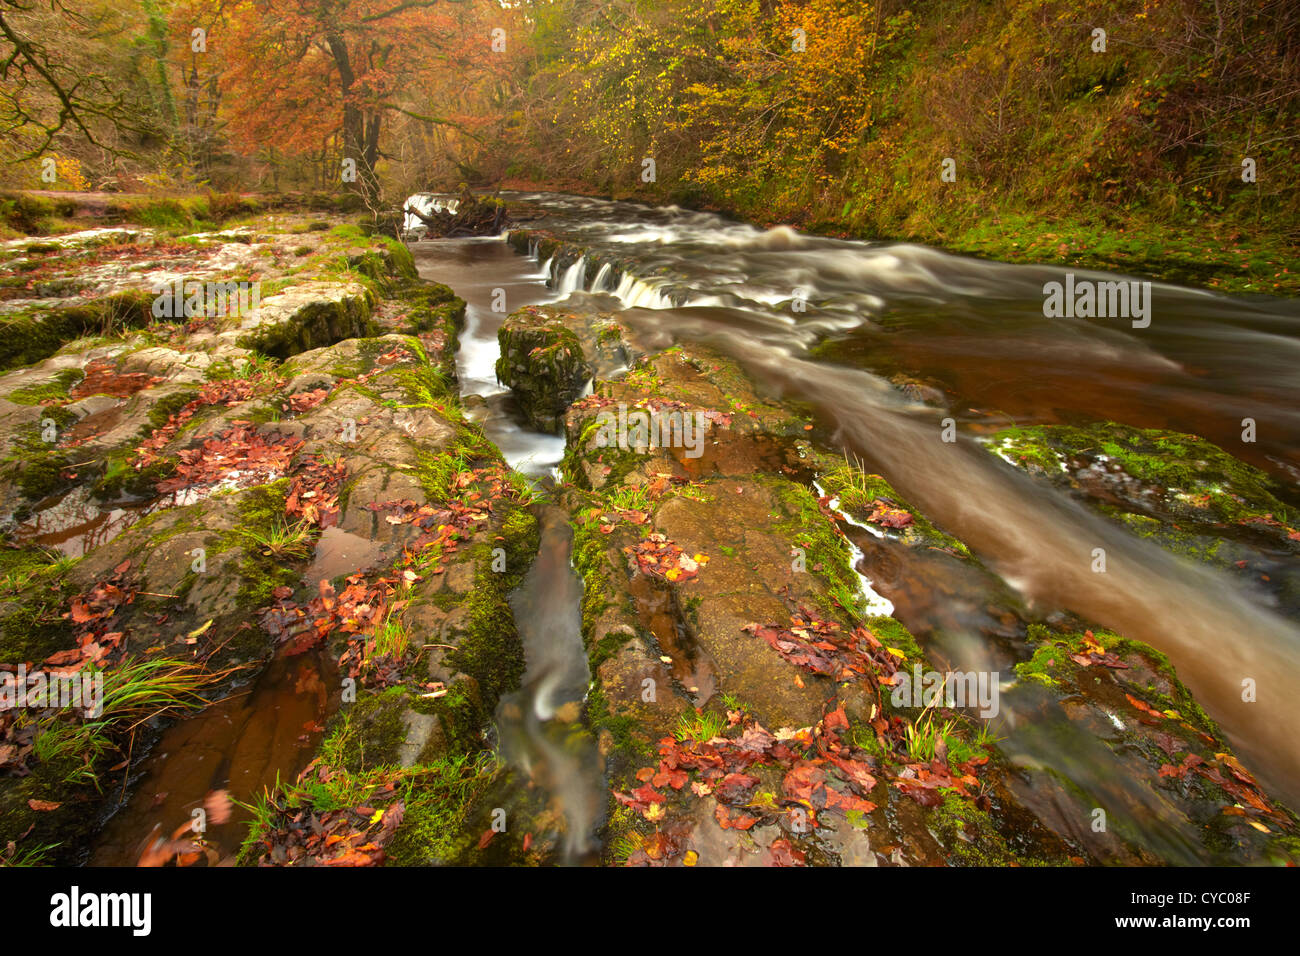 The River Mellte, just above Sgwd Pannwr waterfall, Ystradfellte, Brecon Beacons, Powys Wales Stock Photo